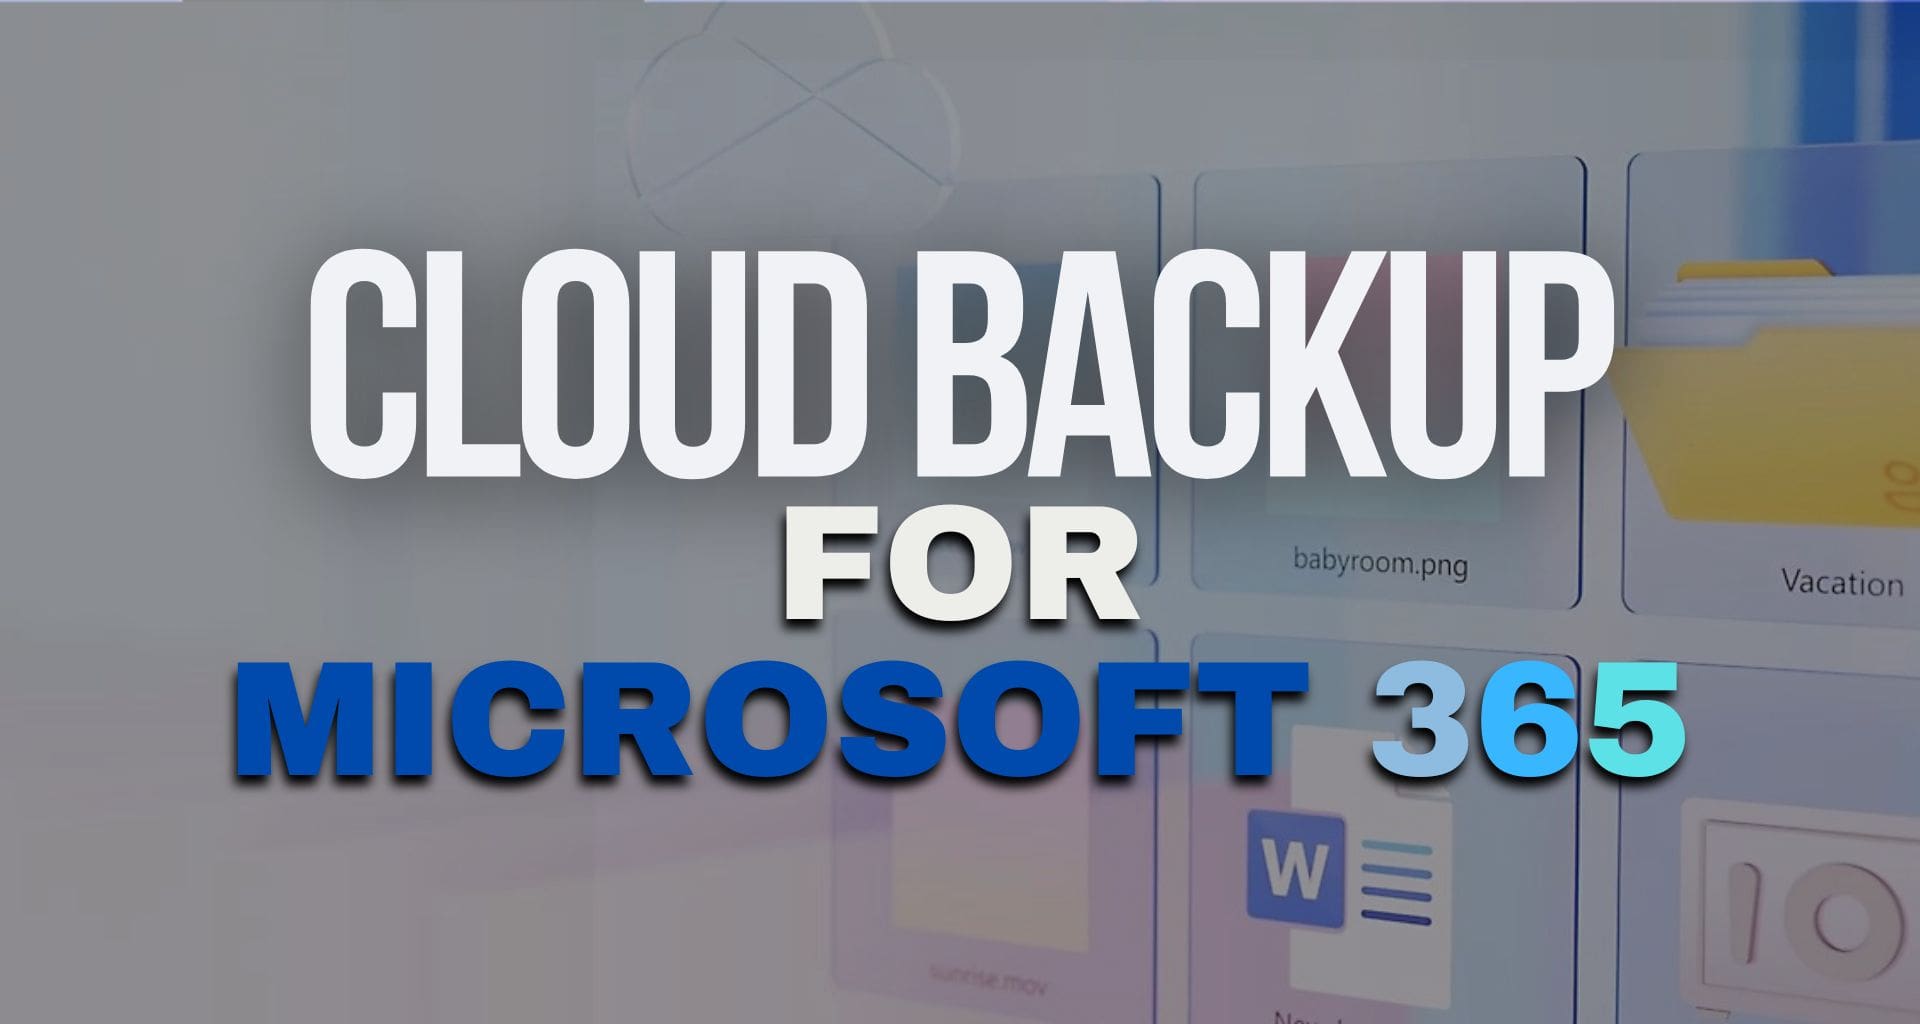 easiest method for getting cloud backup for microsoft office 365 in the UK